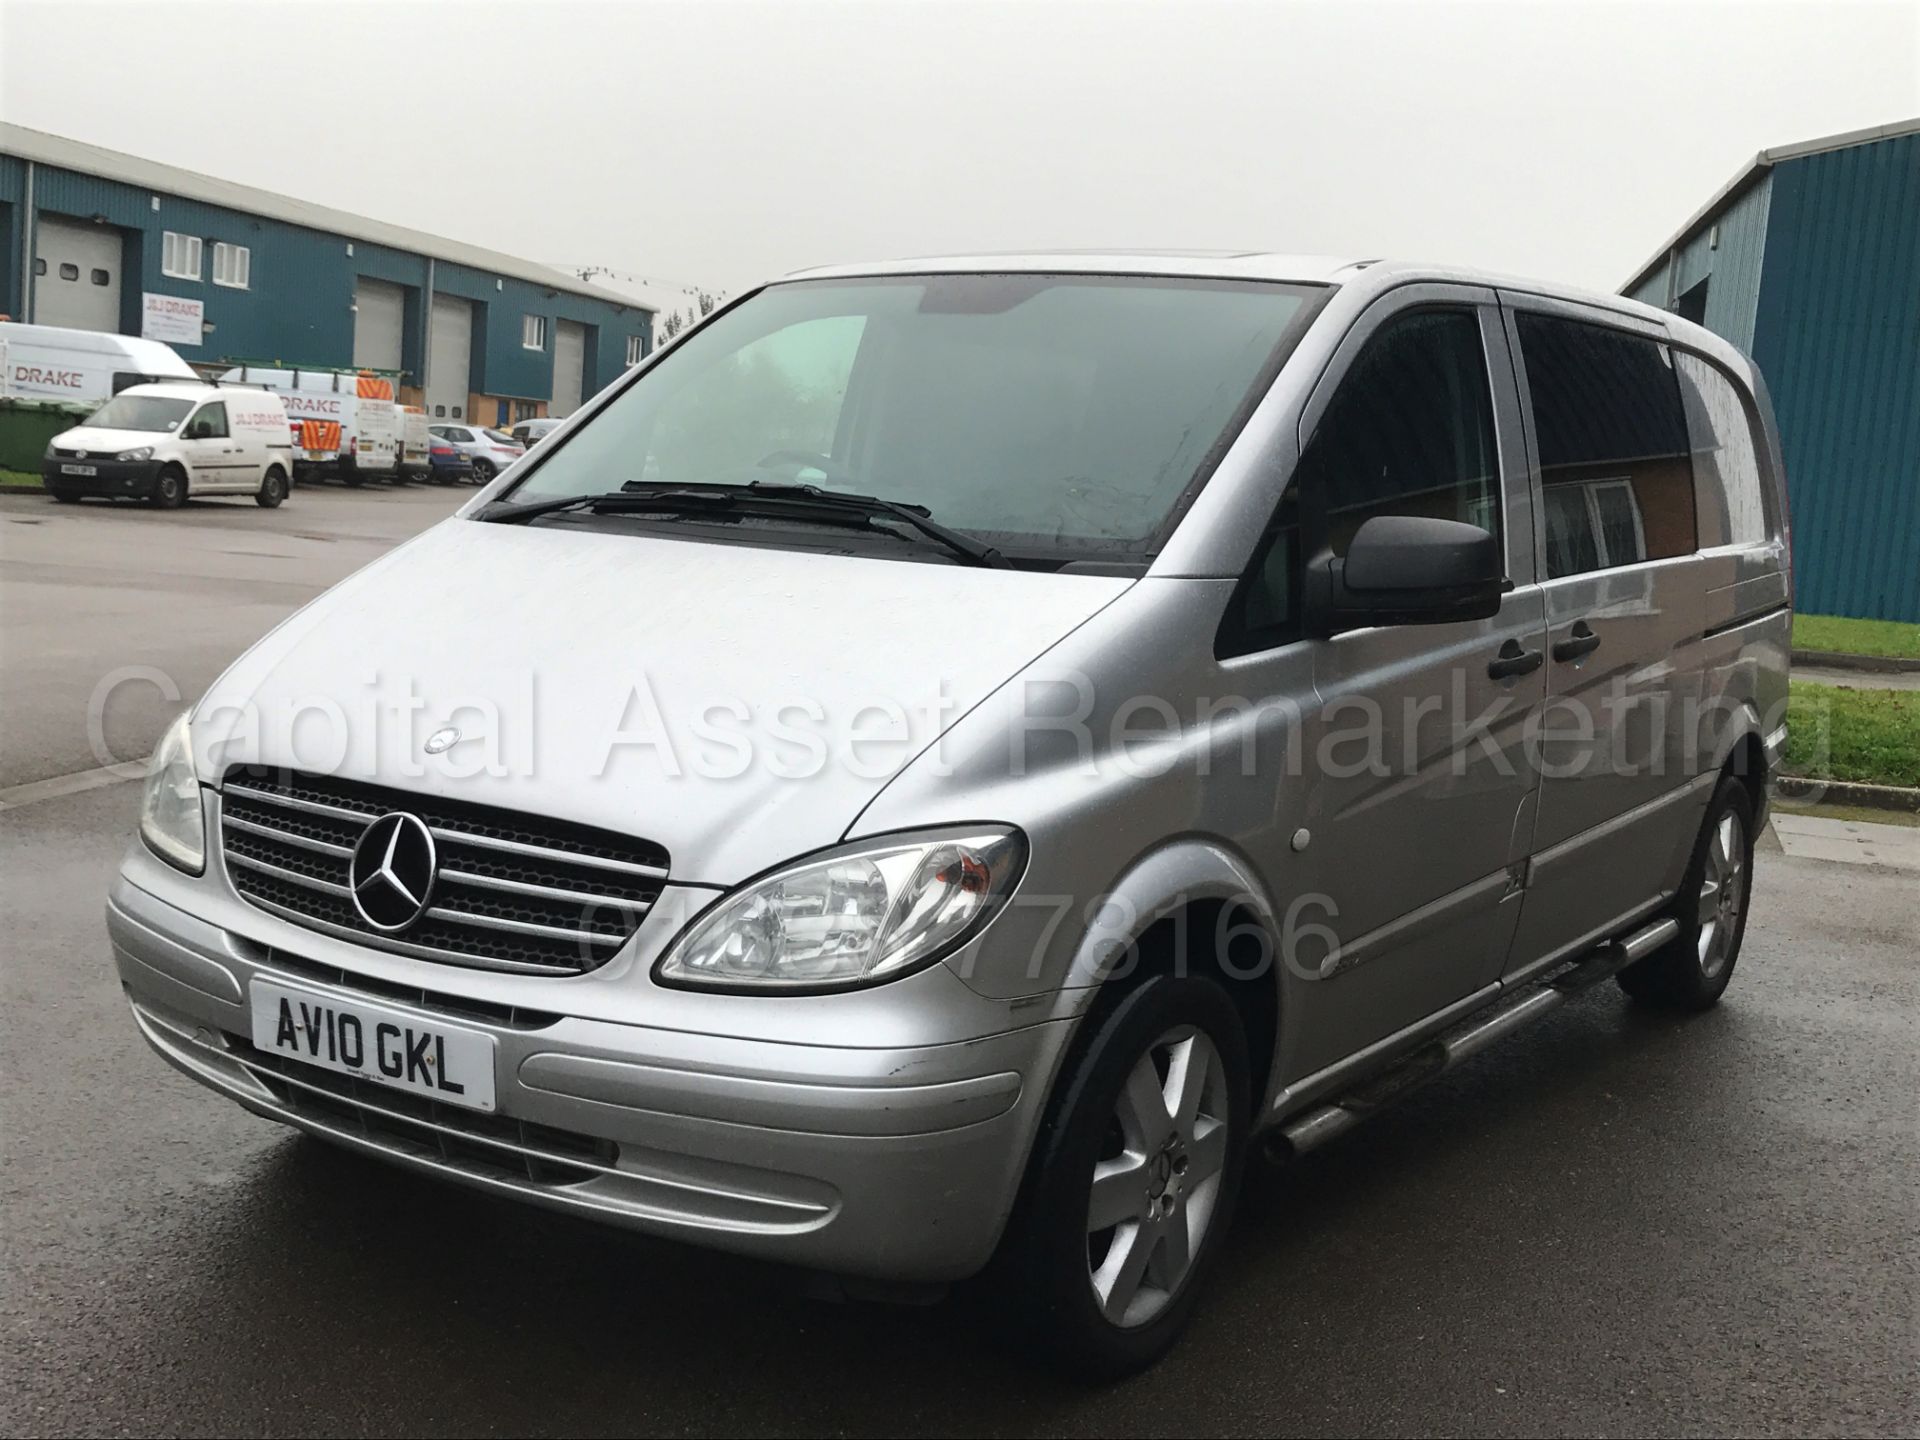 MERCEDES VITO *SPORT* '5 SEATER DUELINER' (2010 - 10 REG) '2.1 CDI - 150 BHP - 6 SPEED' **AIR CON** - Image 3 of 35